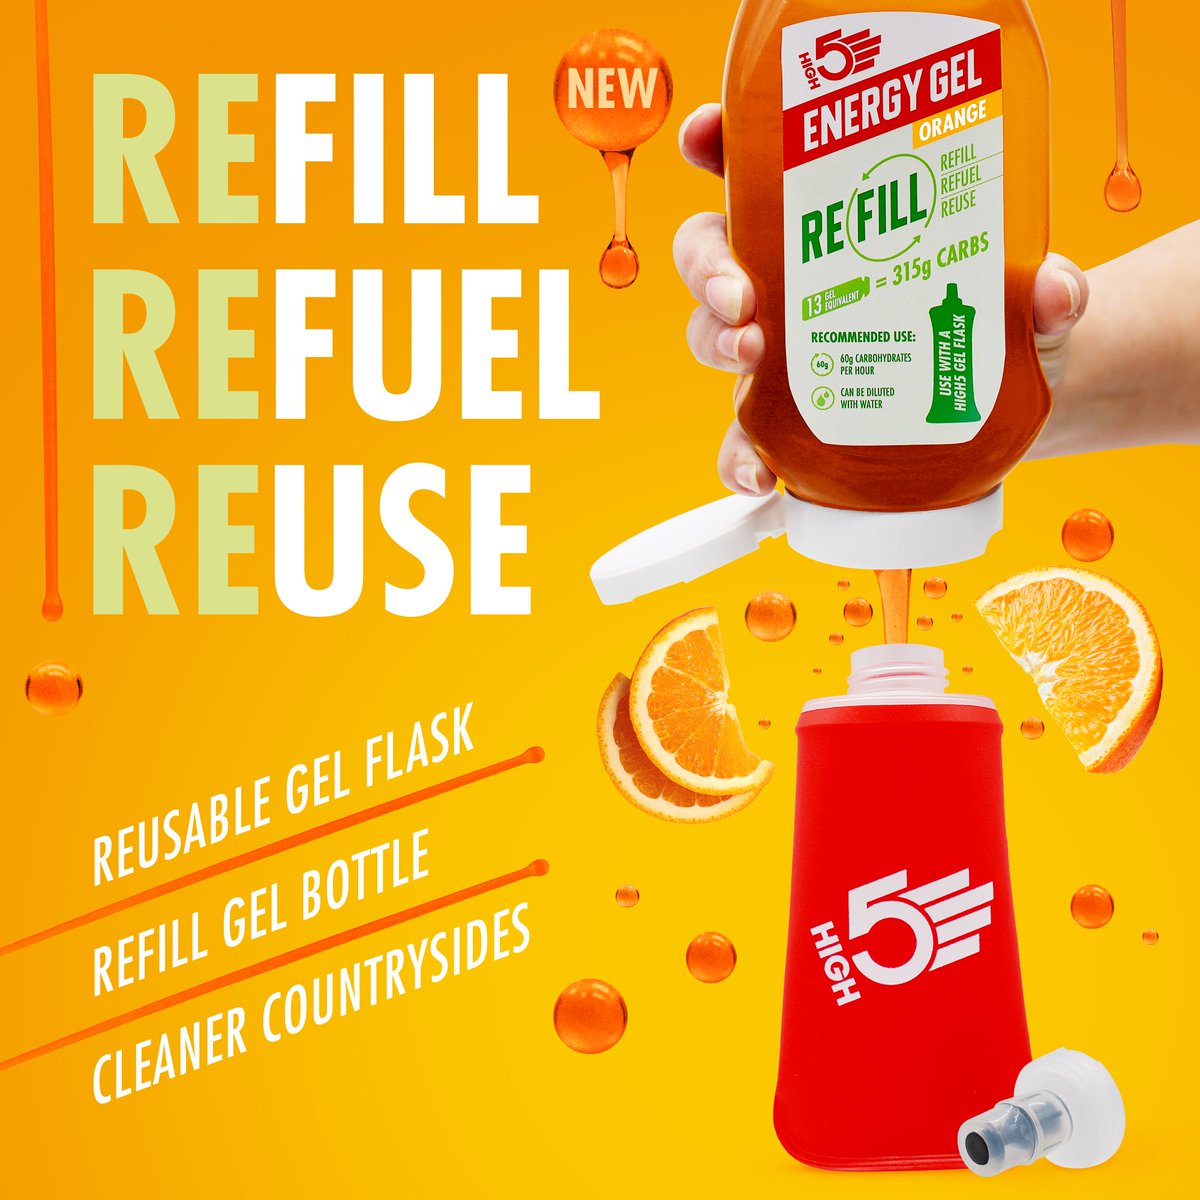 Our Energy Gel Refill Bottle is now available in ORANGE! 🍊 You asked, we delivered. Energy Gel Refill Orange joins Berry, giving you another flavour to top up your HIGH5 Reusable Gel Flask with. Show now: highfive.co.uk/collections/tr… #HIGH5Fuelled #EnergyGel